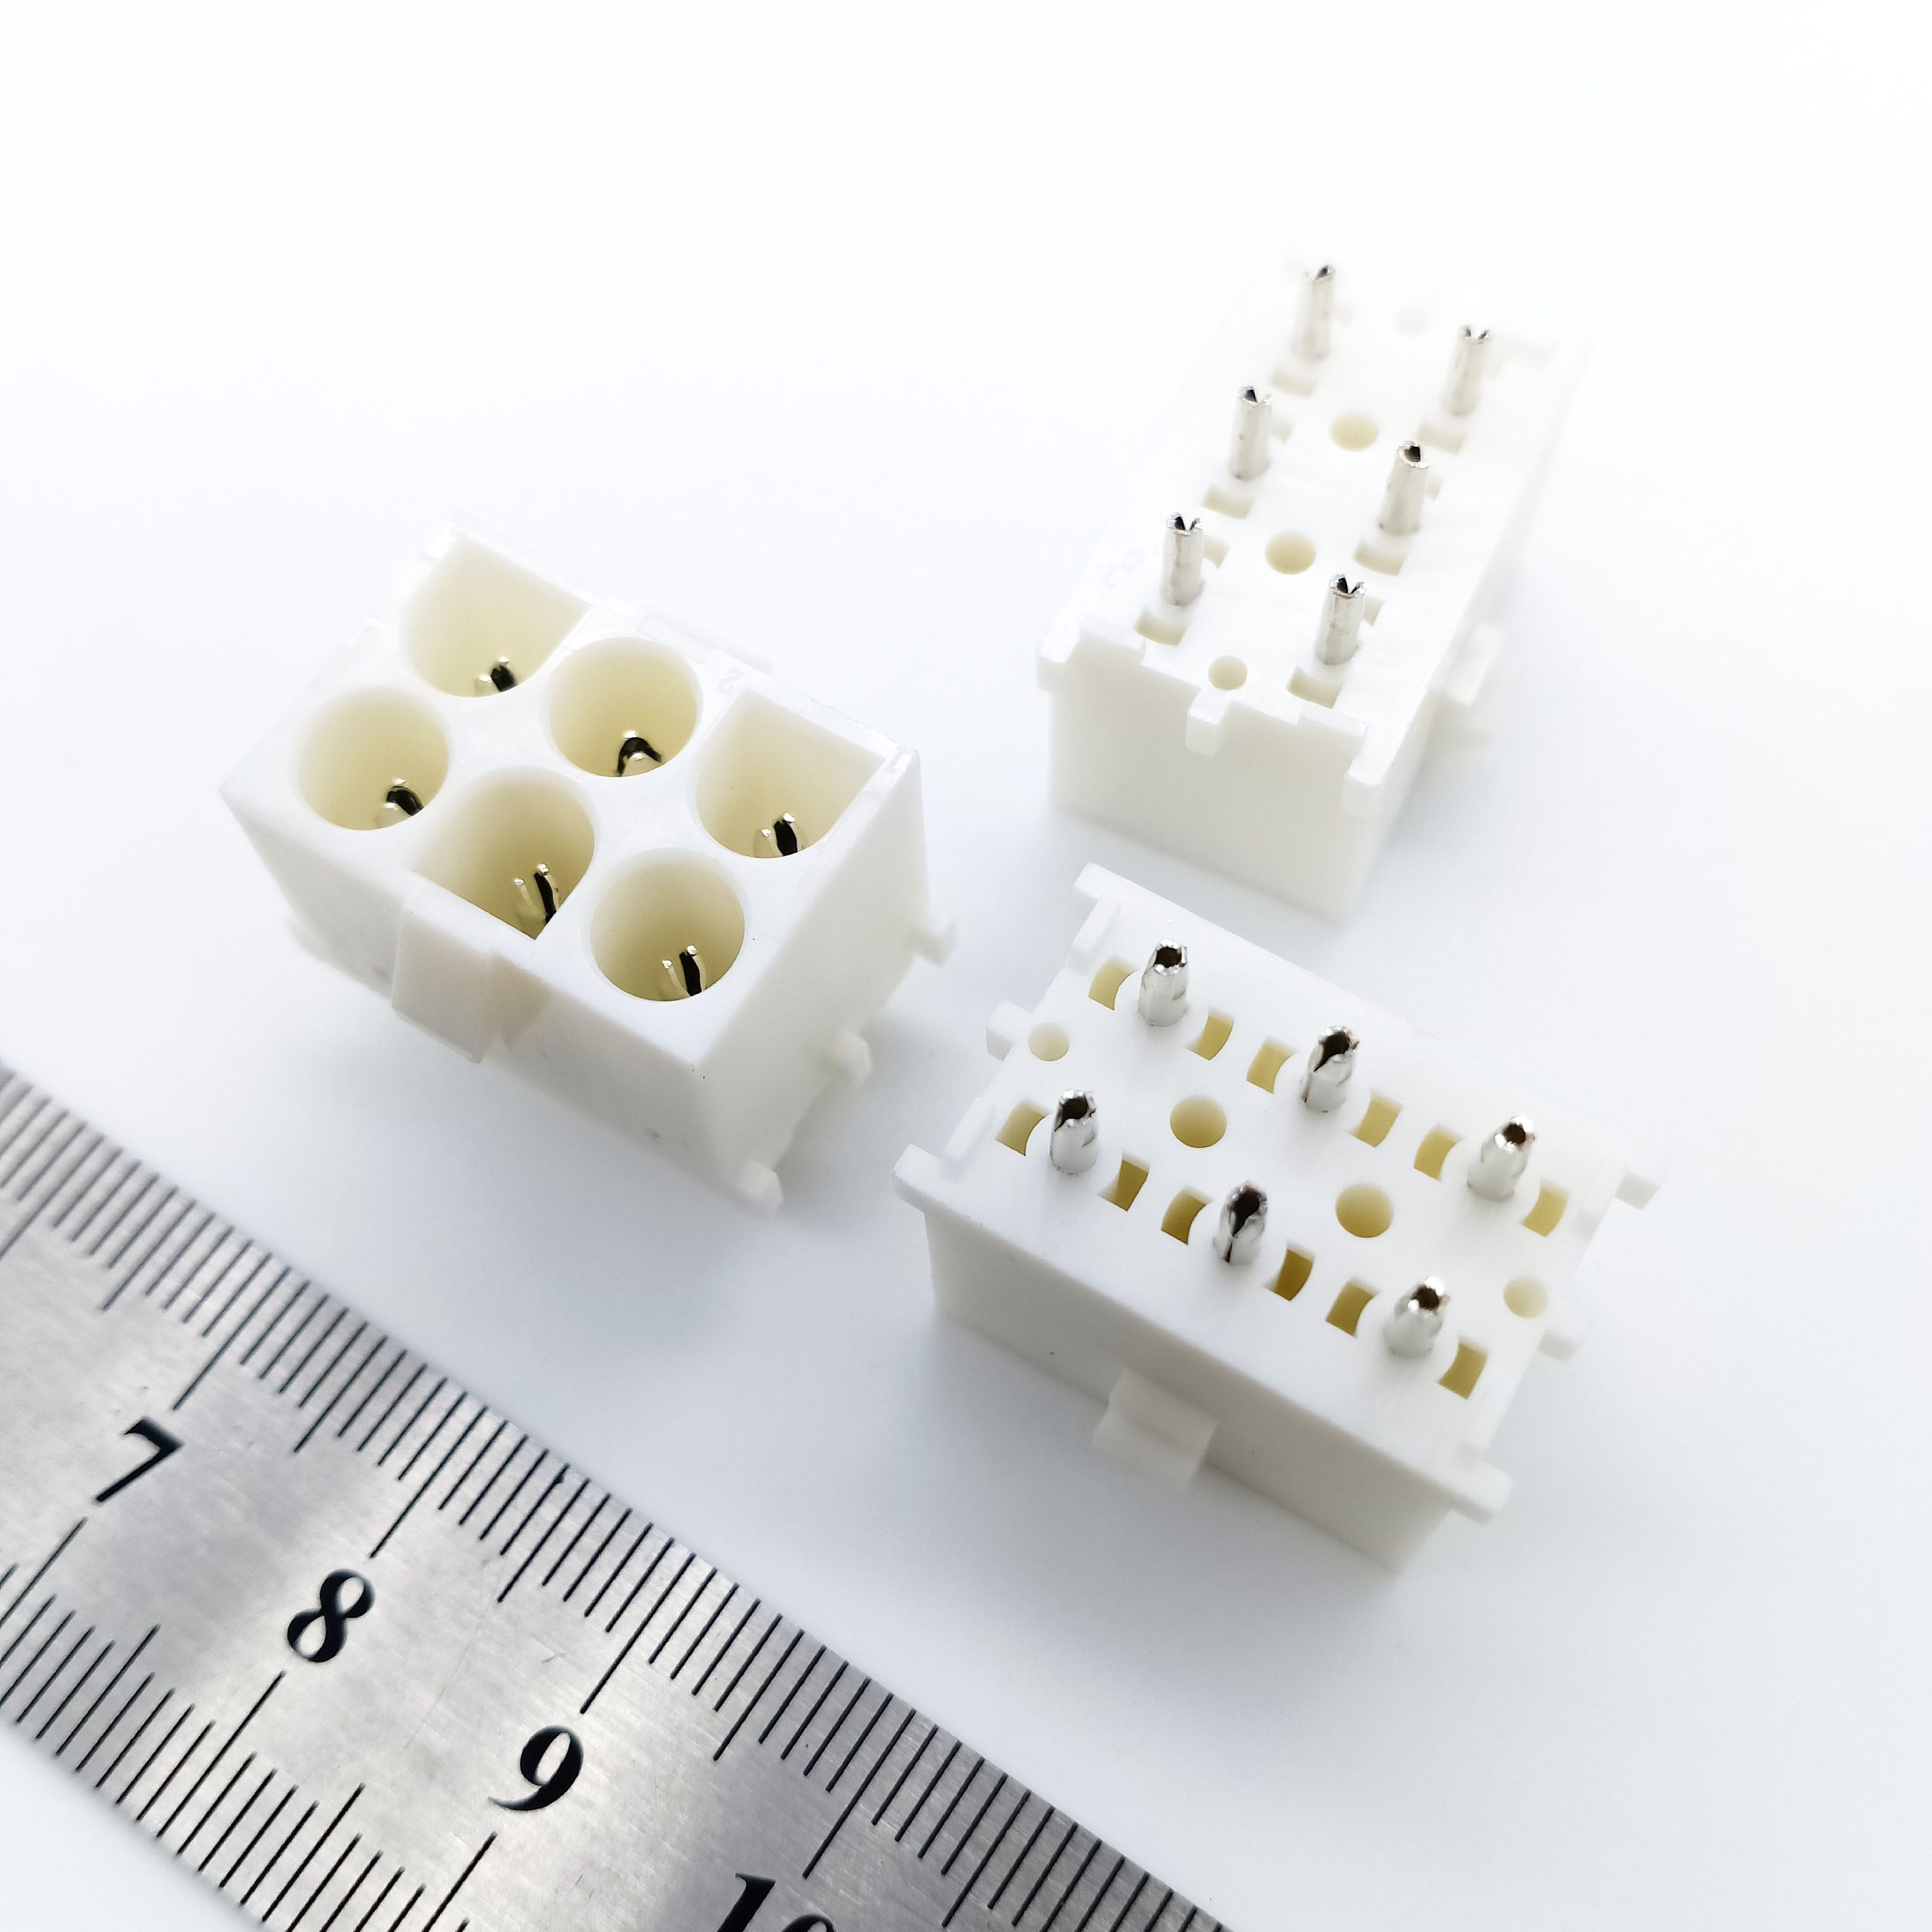 Offering reliability and adaptability, these connectors are ideal for diverse applications. Explore their features and enhance your electrical connections.